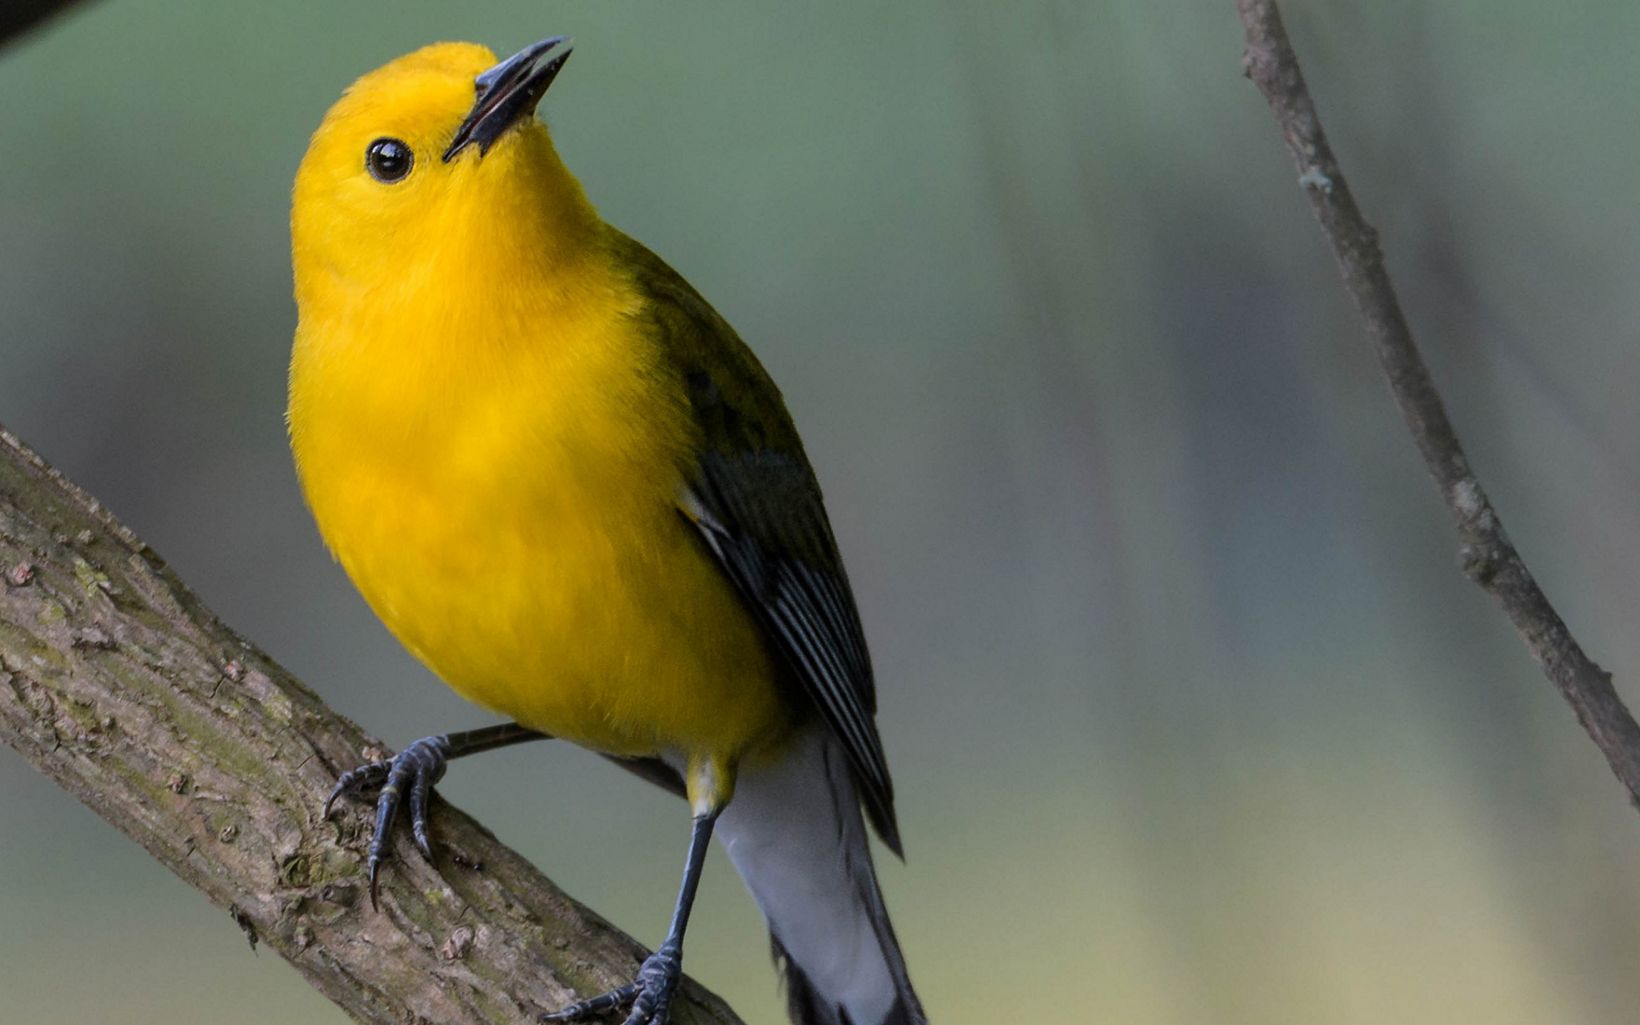 A yellow bird with black wings perches on a thin branch.